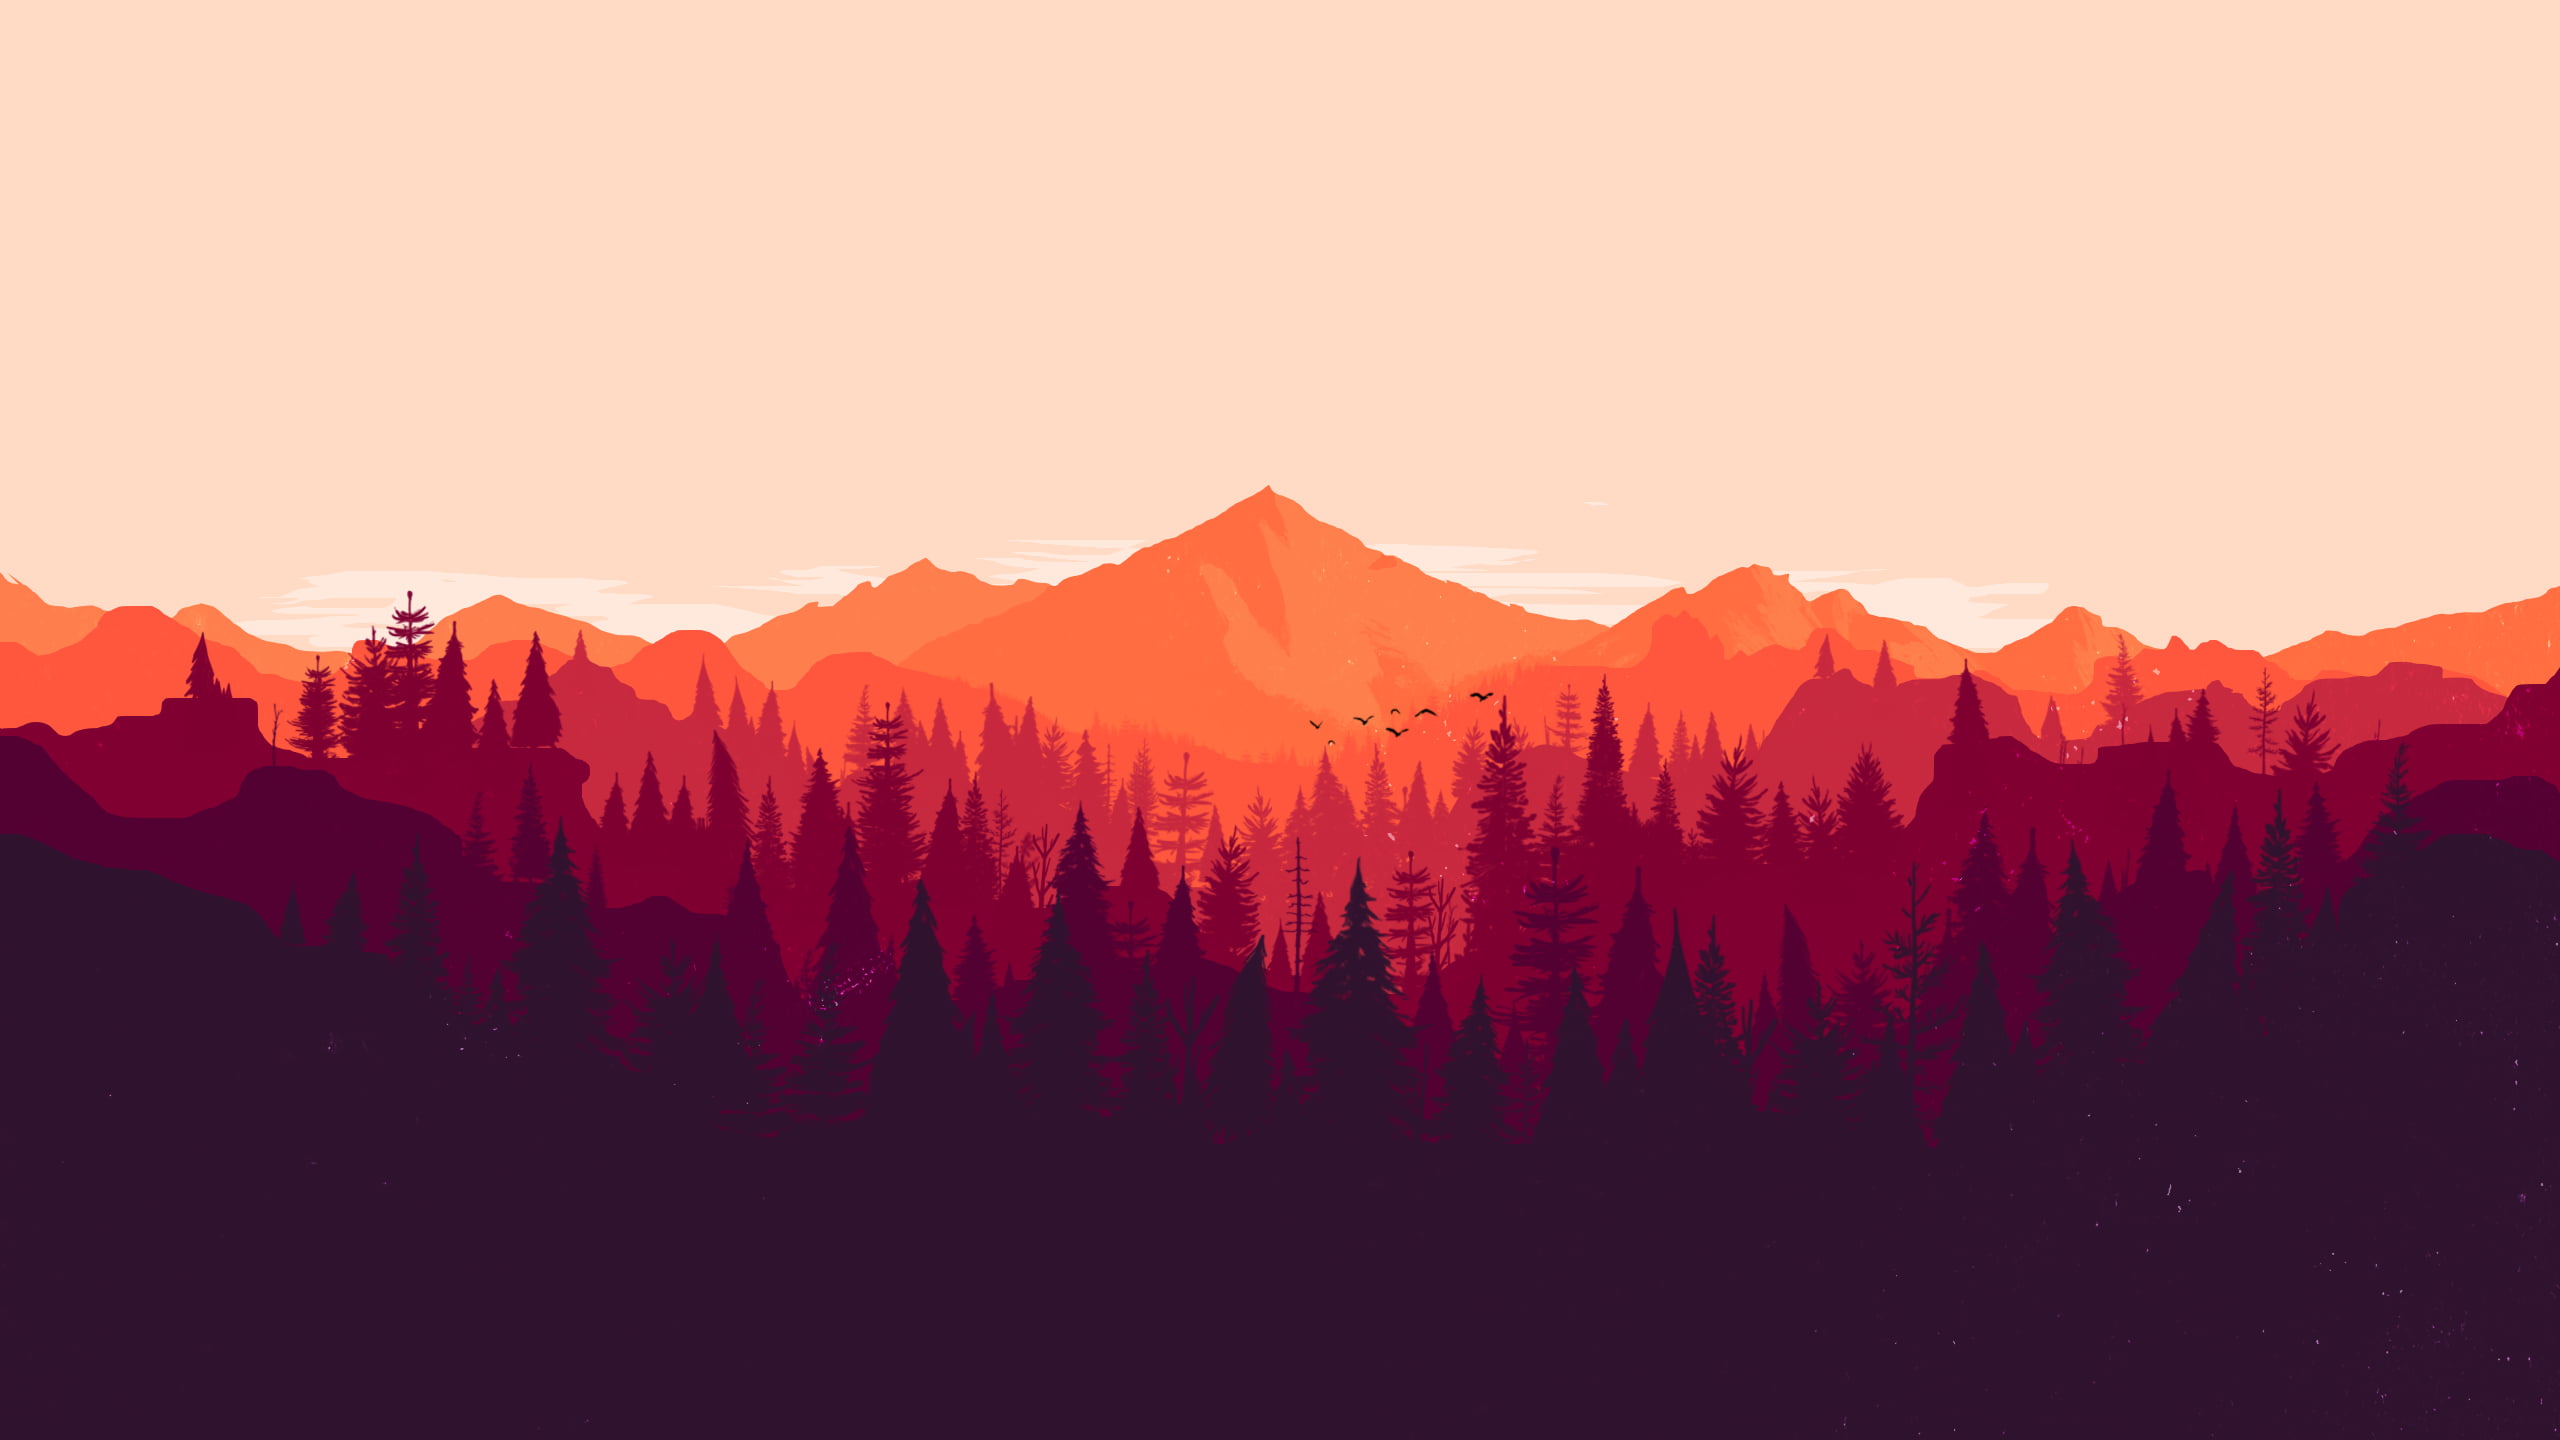 silhouette of trees, forest, Firewatch, minimalism, orange, red